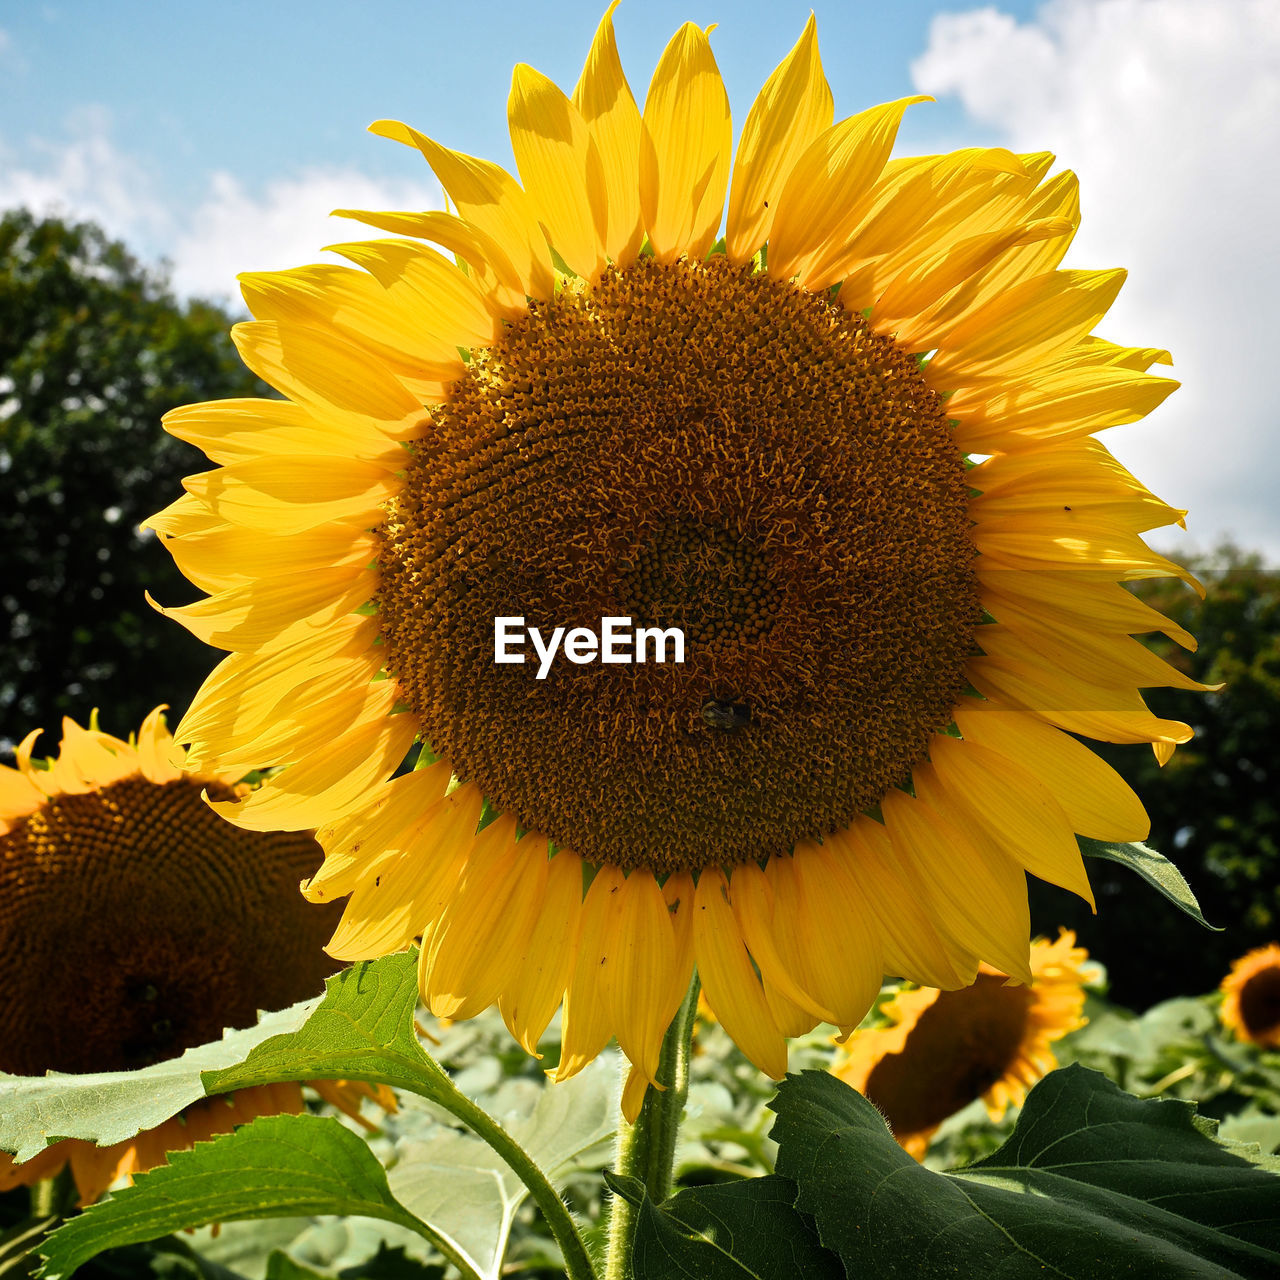 CLOSE-UP OF SUNFLOWER BLOOMING ON FIELD